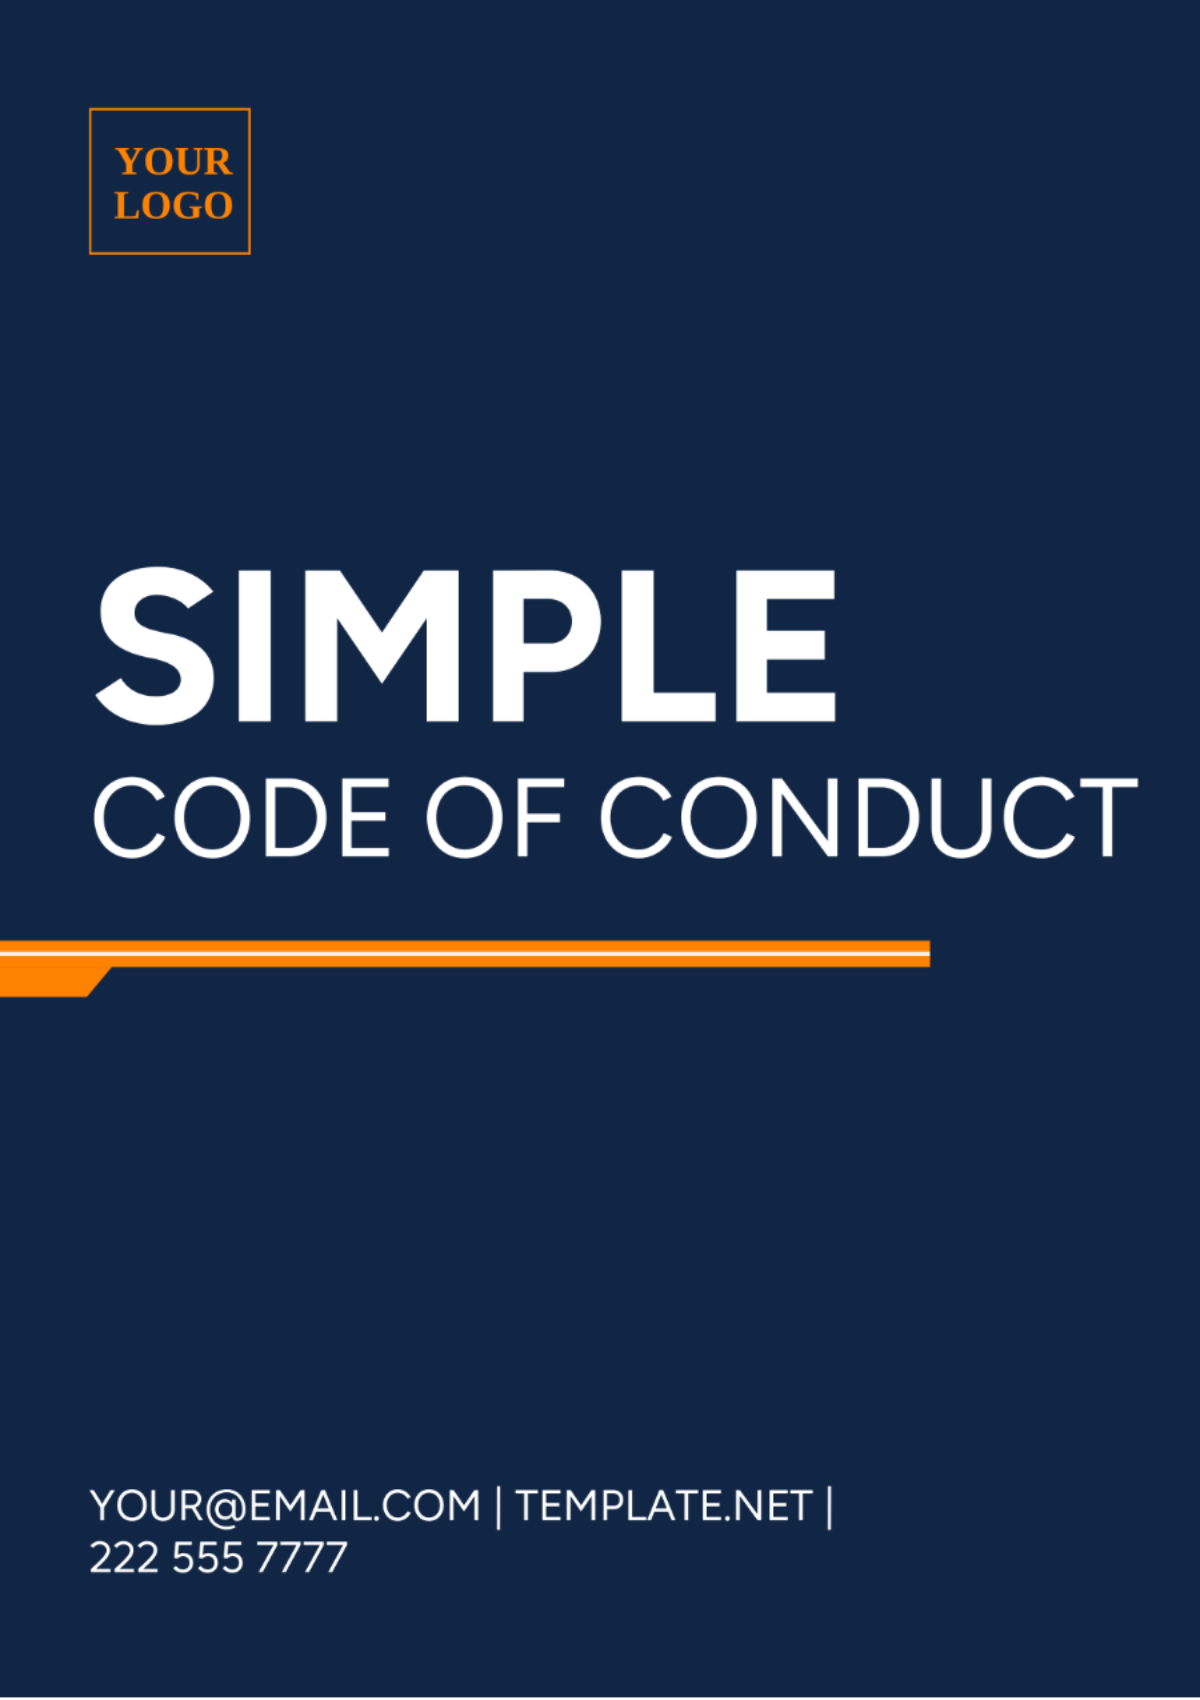 Simple Code of Conduct Template